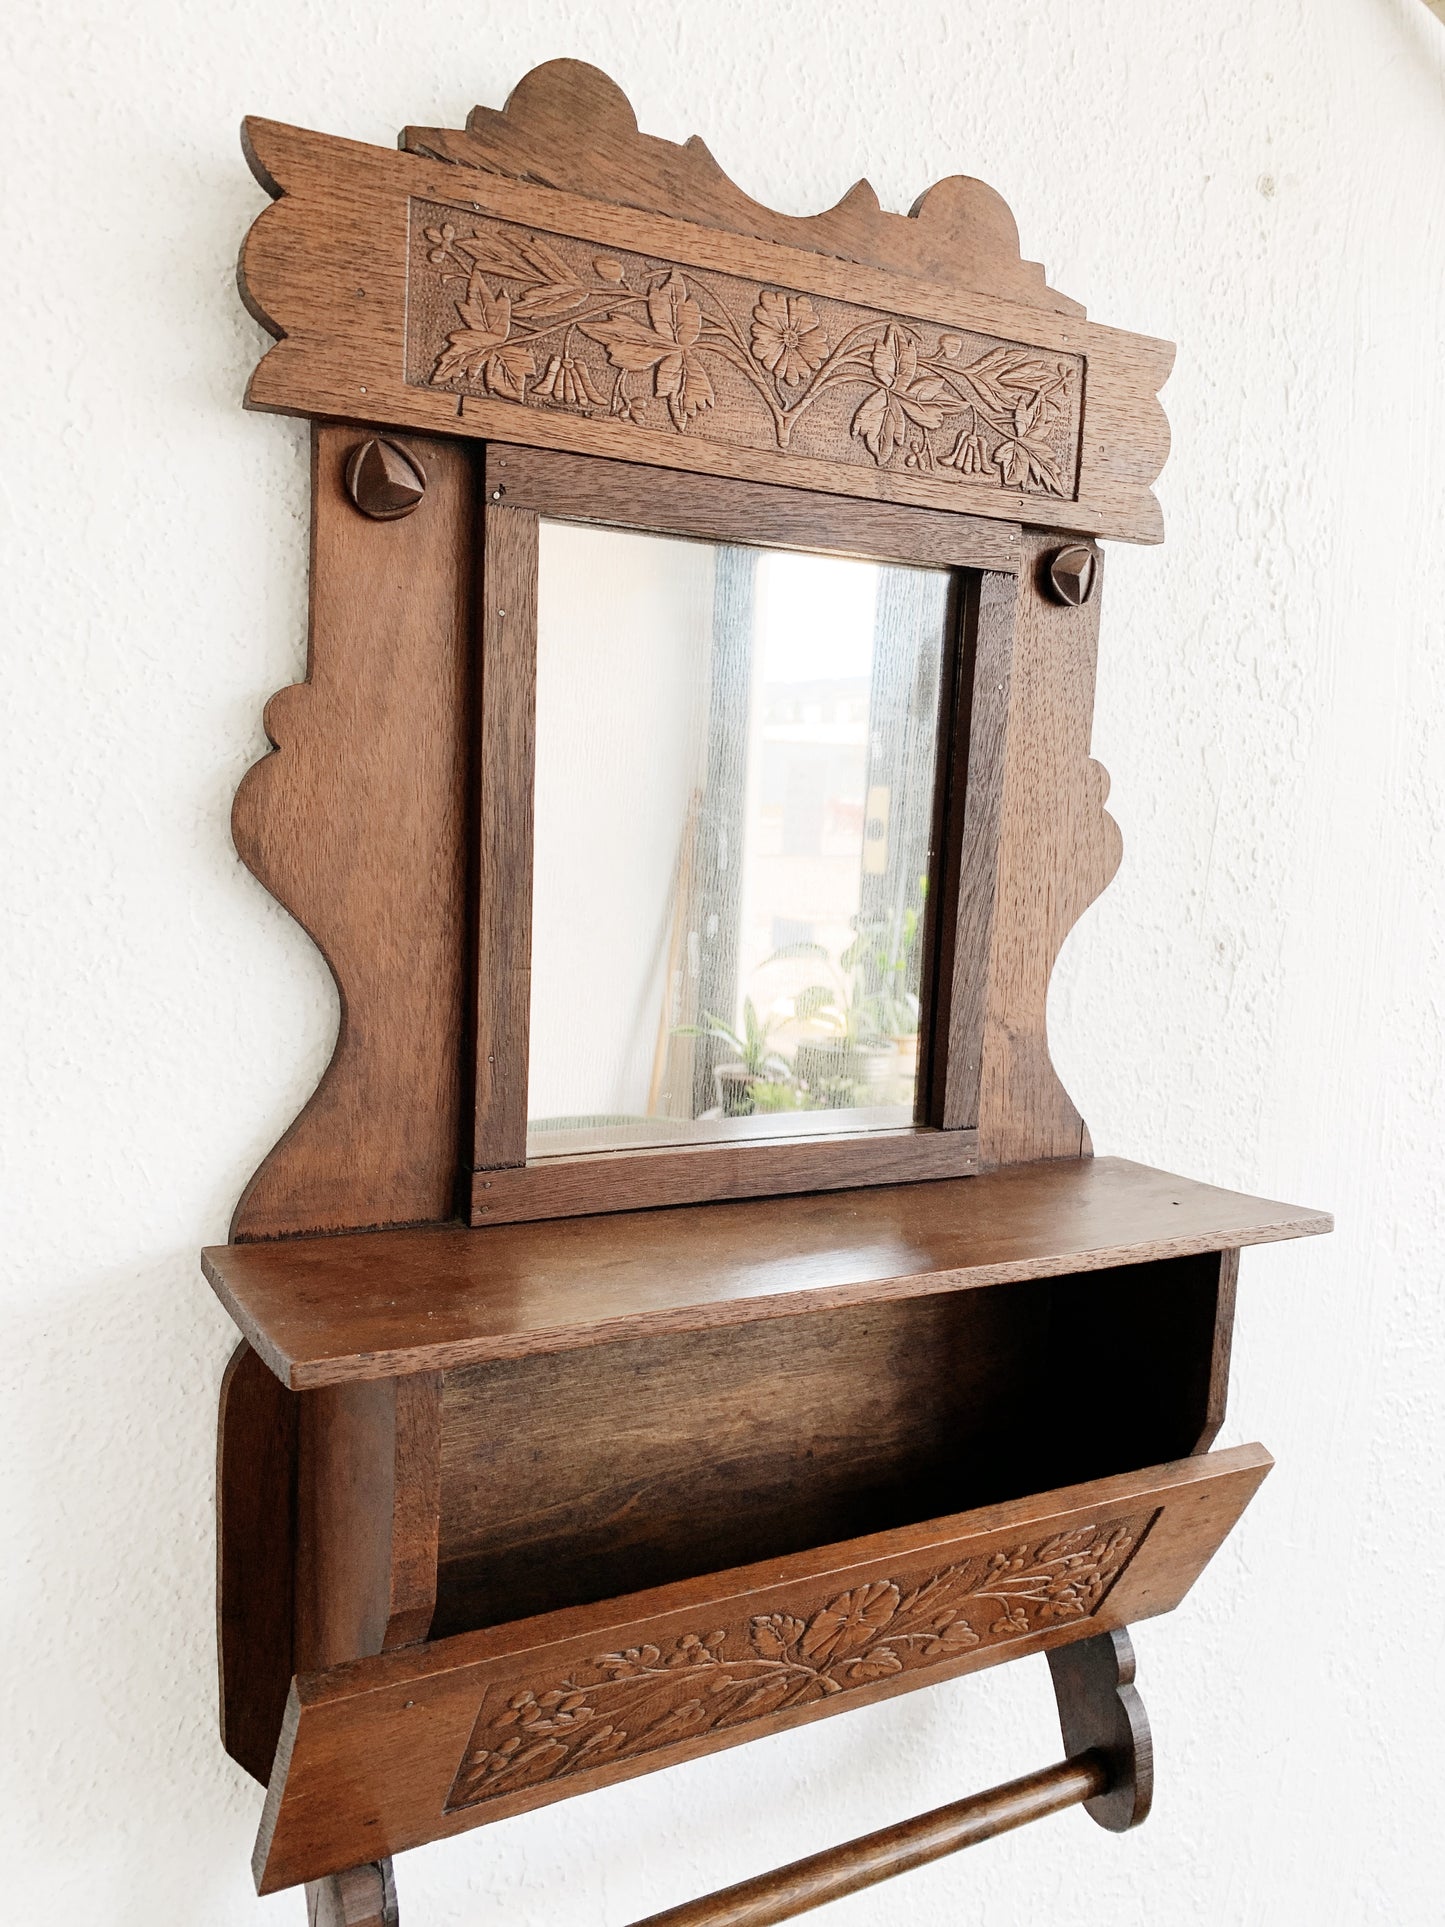 Antique Decorative Mirror with Shelf and Dowel